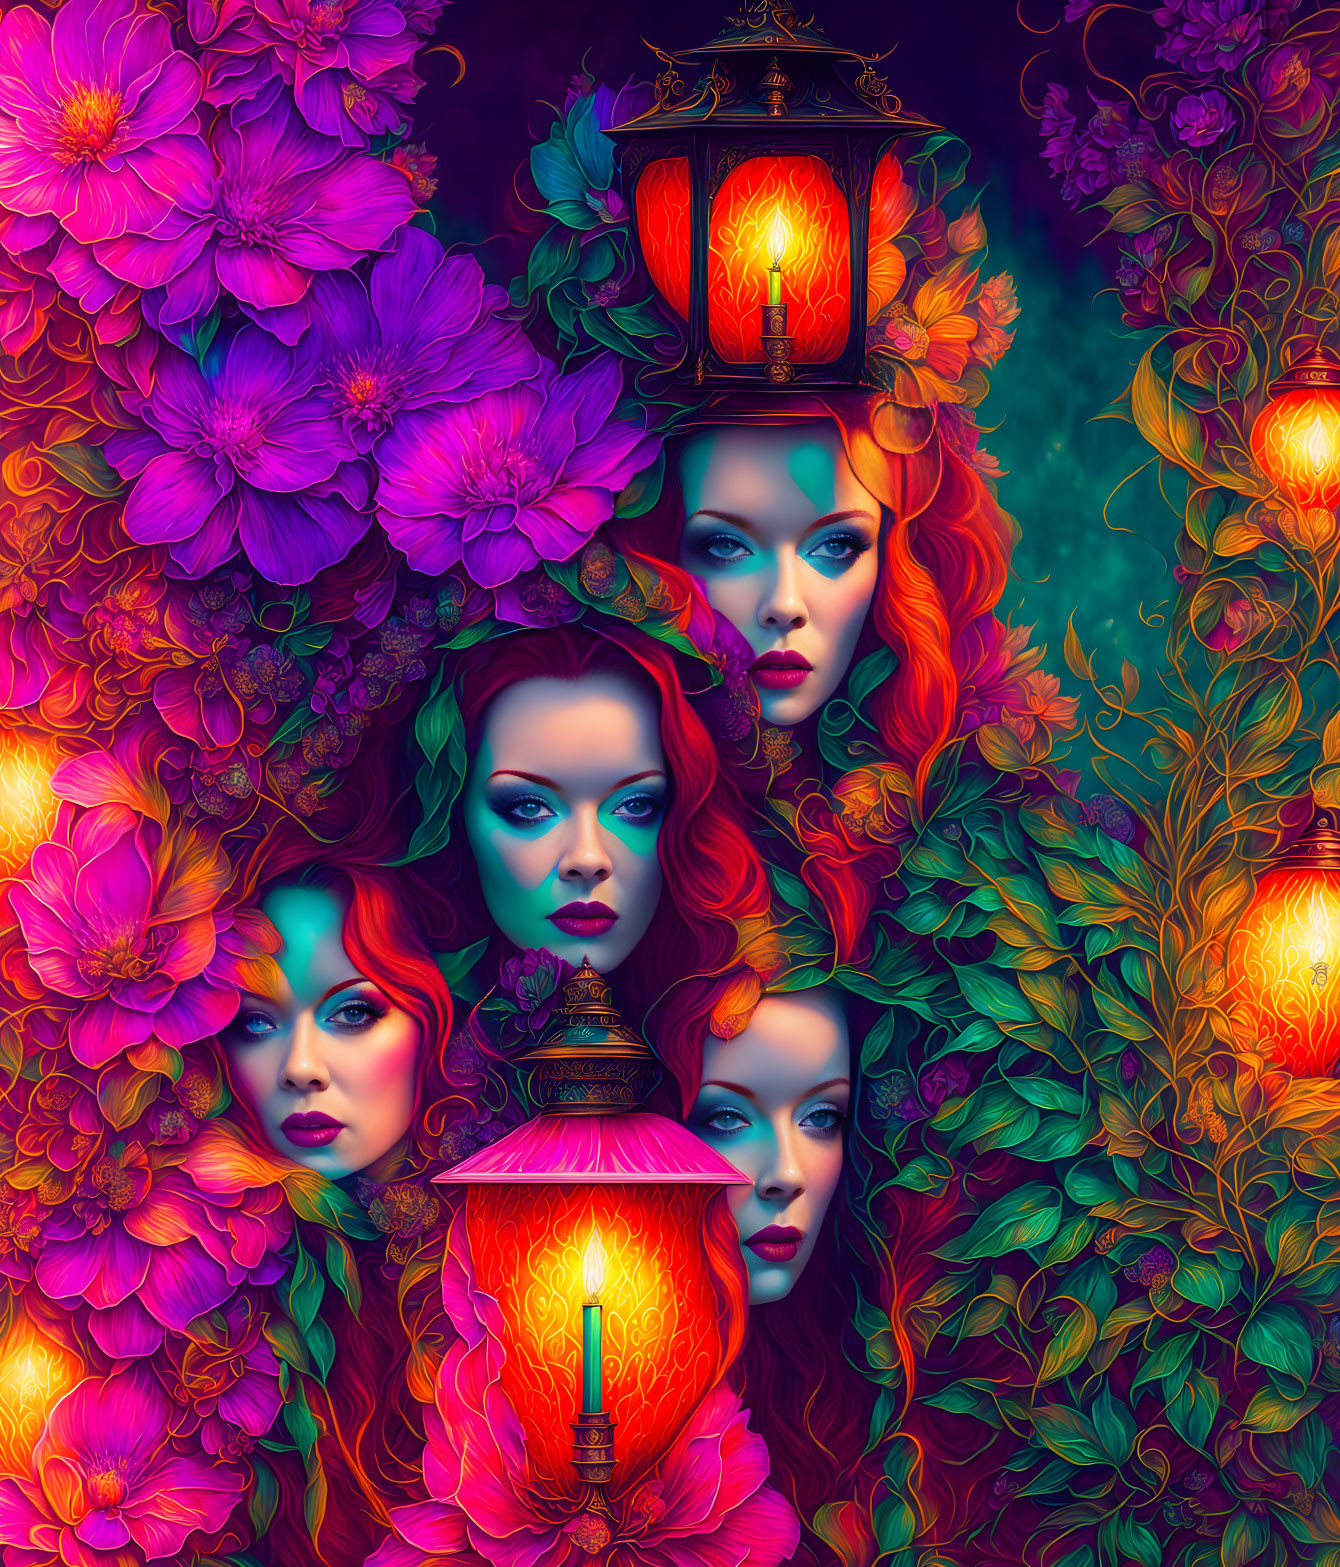 Vibrant illustration of four women's faces surrounded by flowers and lanterns